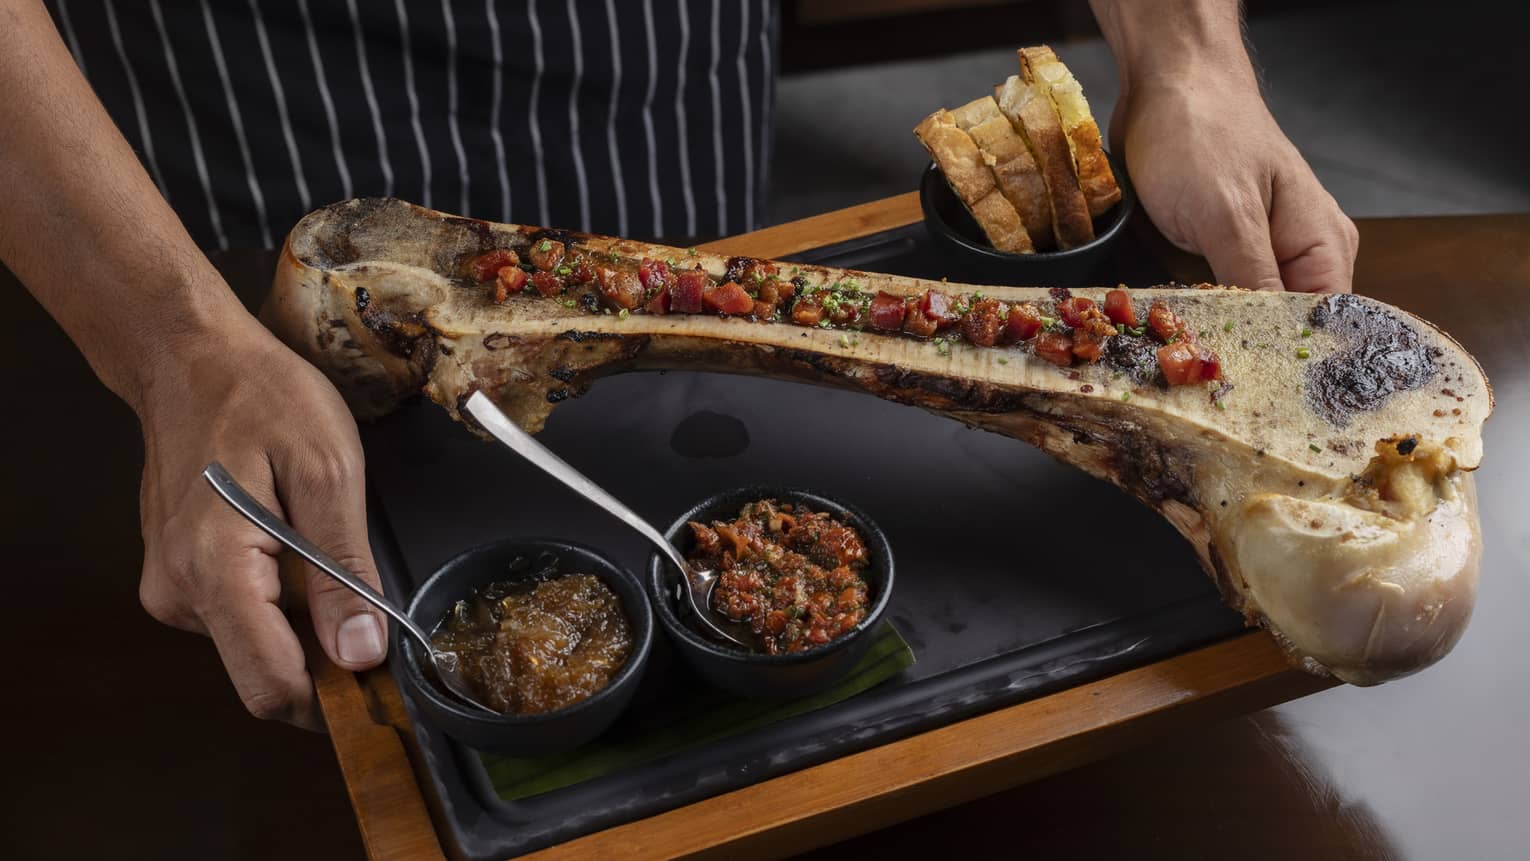 Large piece of bone cut in half and topped with prosciutto, chimichurri, cives and chiverre jam, served with a side of toasted bread all on a wood-and-black serving platter